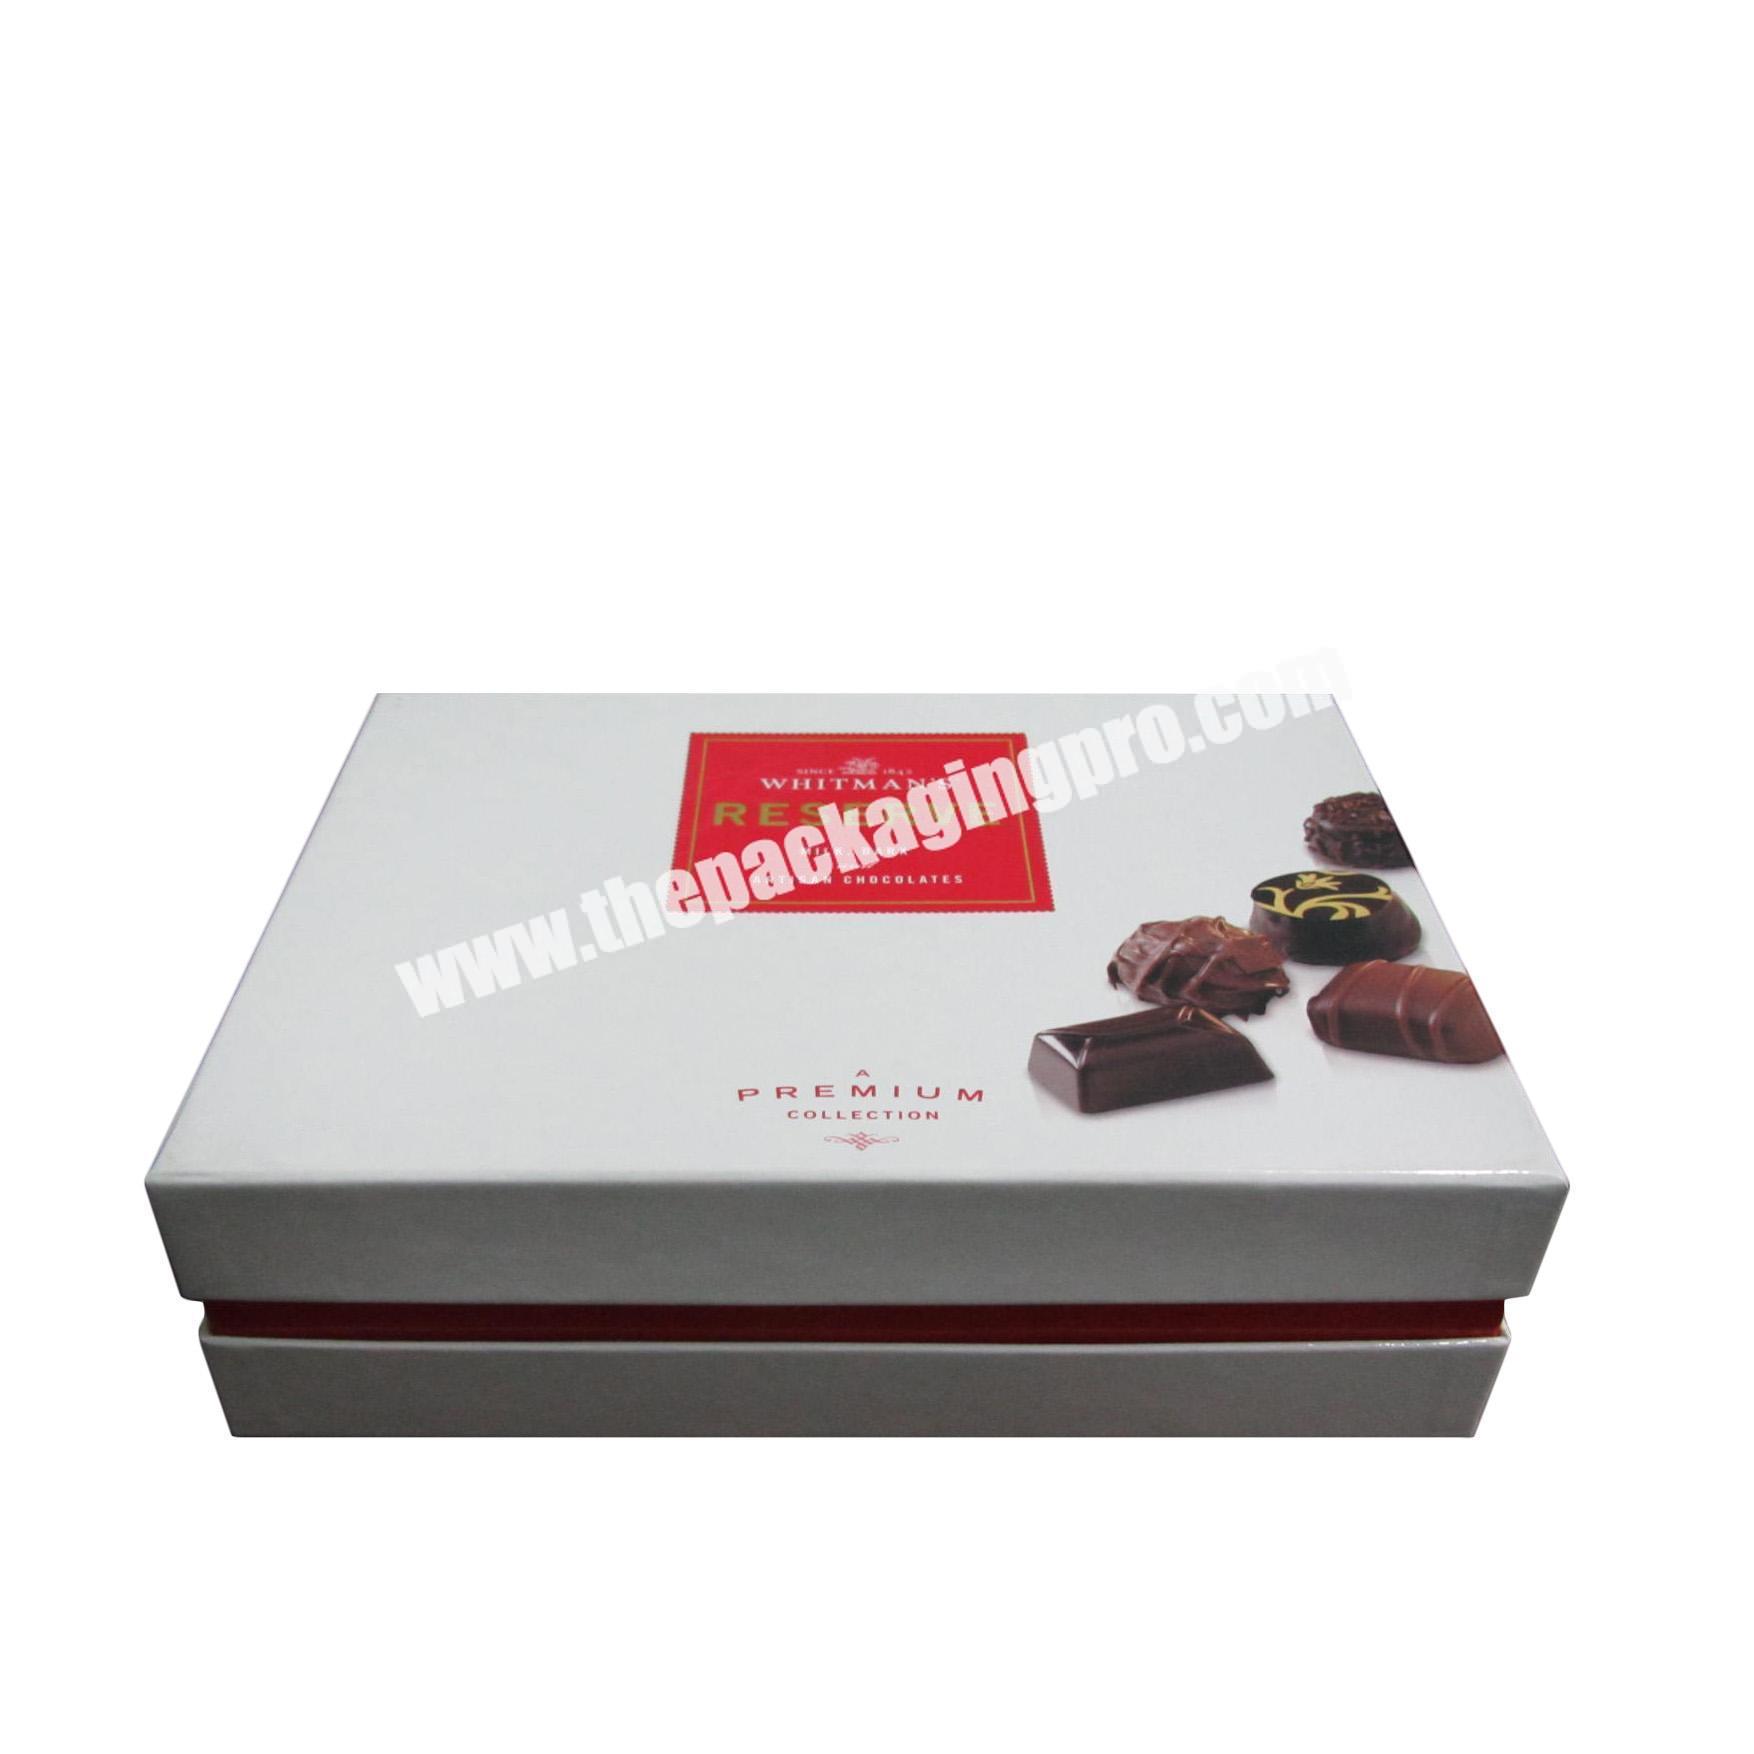 2020 Top Quality Gift box Packaging box  paper box manufacture  customized design